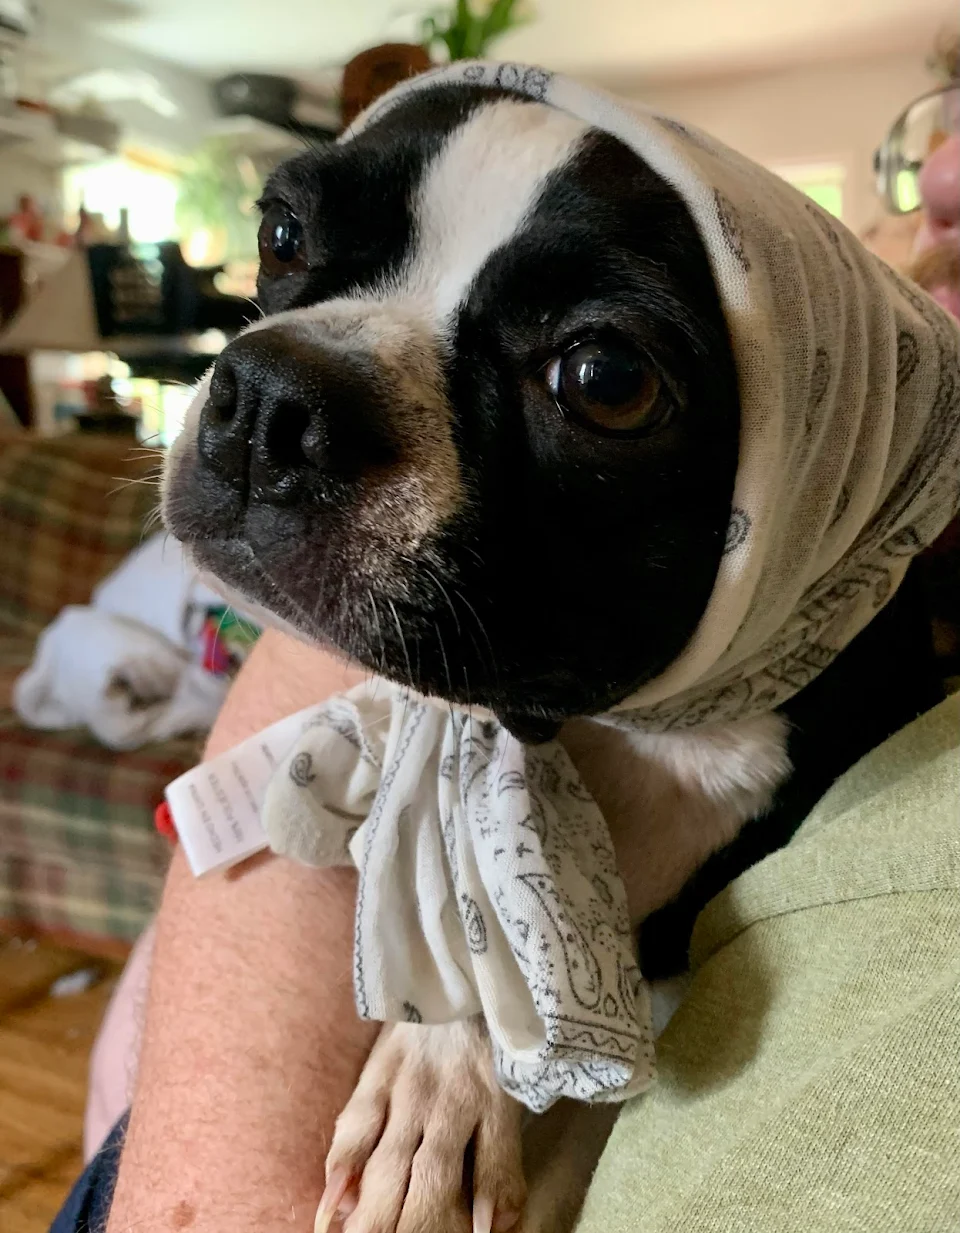 Getting her ear meds turns my Boston into Katrinya from the old country.